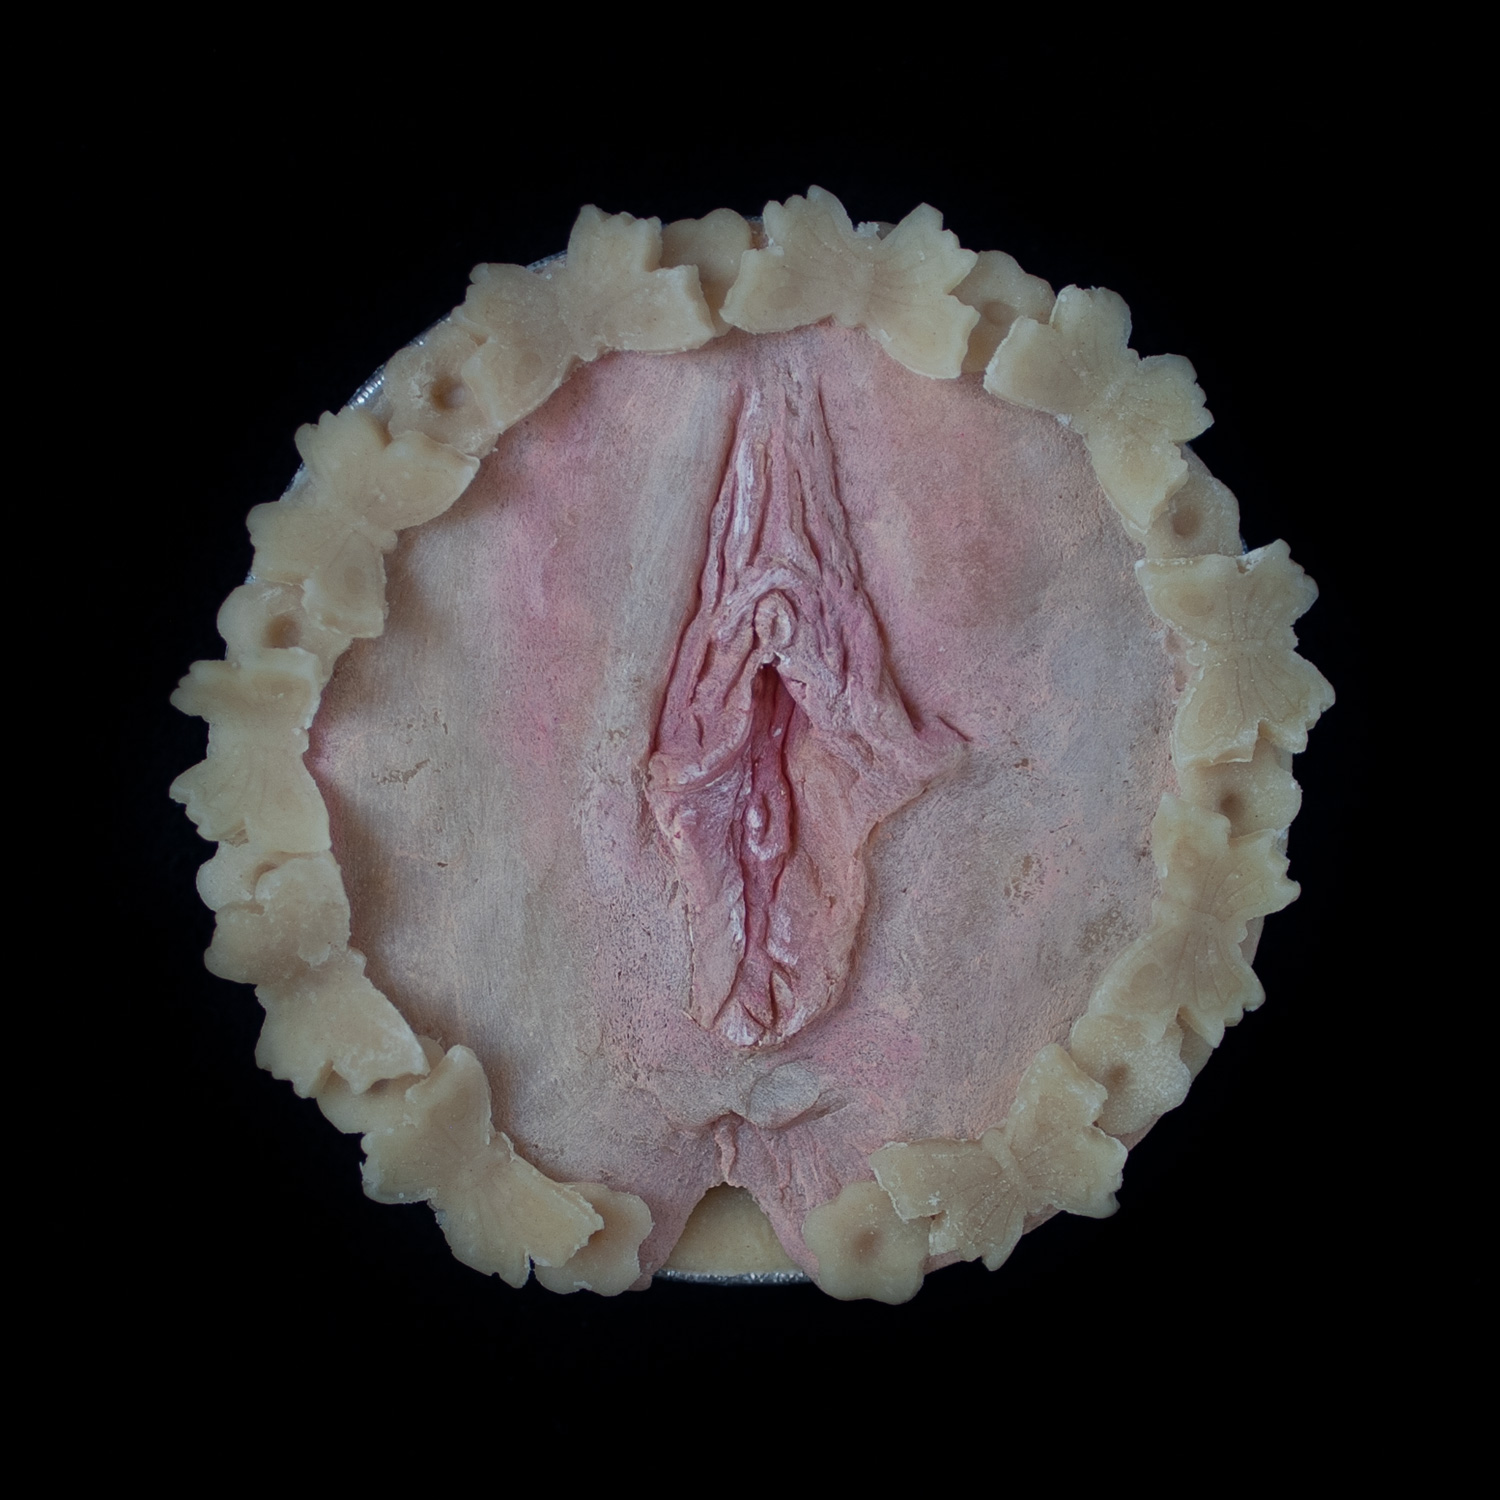 A pie on a black border with hand sculpted vulva made of pie dough. 